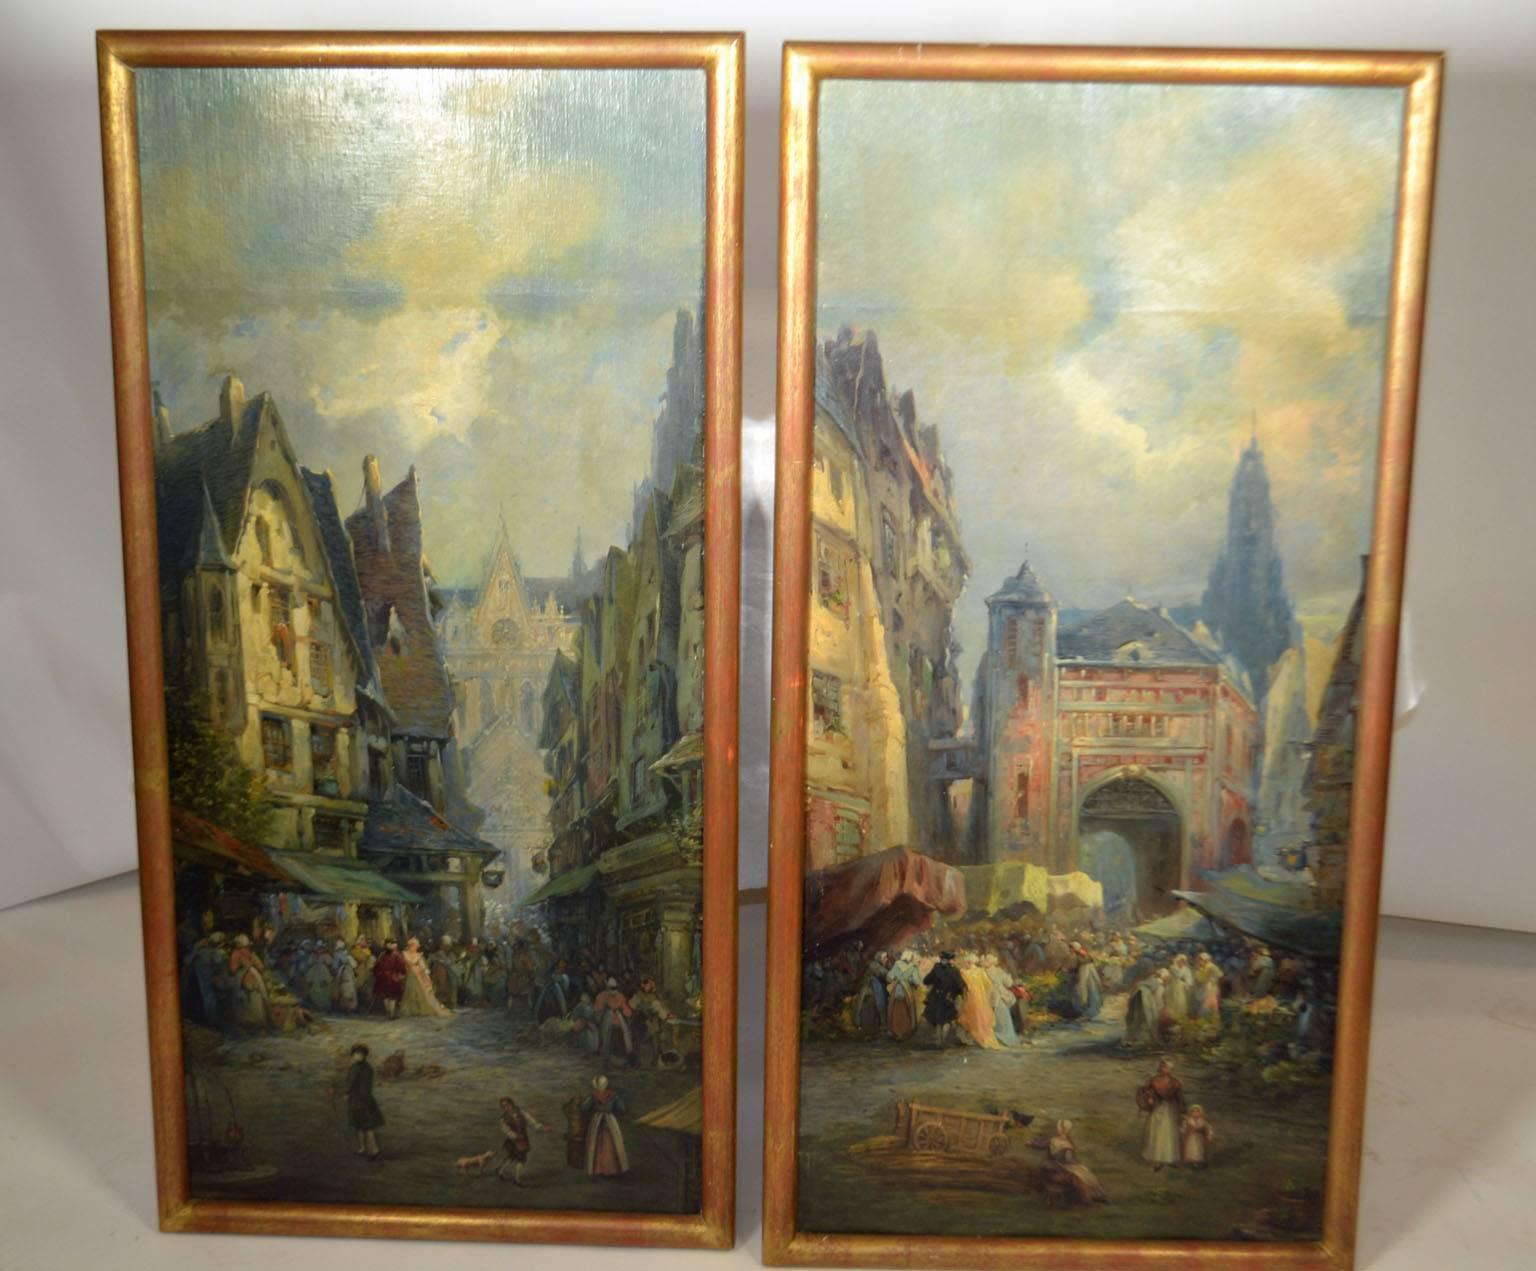 Pair of framed oil on canvas merchant street scenes of Rouen, France 1859. Signed by Jean Sorlain.